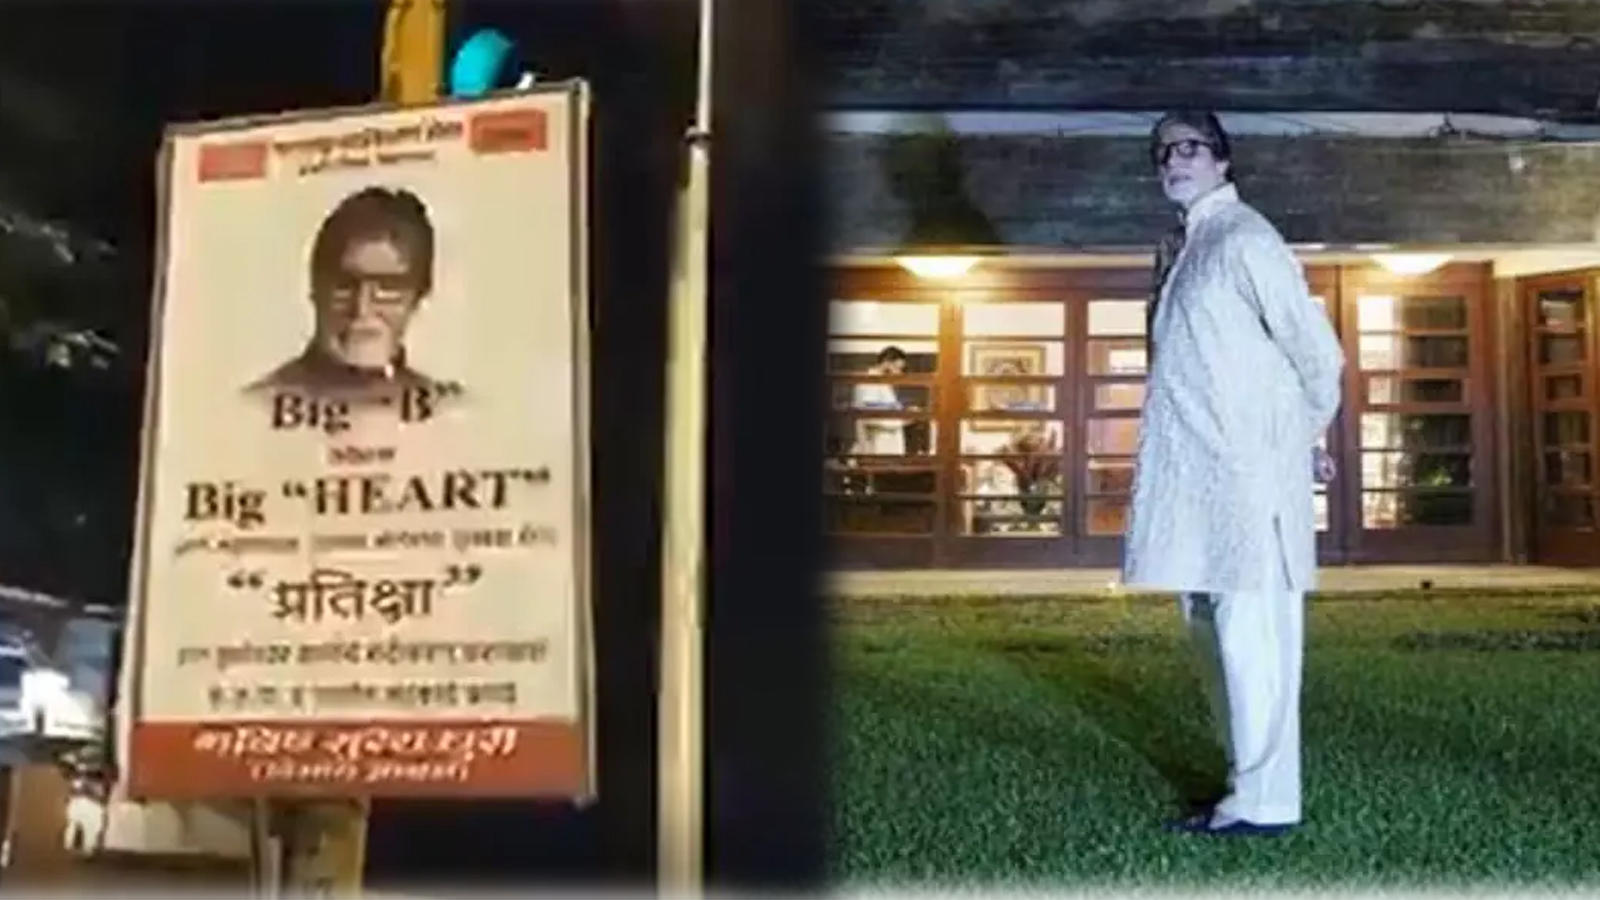 MNS&#39; unique appeal to Amitabh Bachchan for permission to demolish part of his Pratiksha bungalow for widening road catches everyone&#39;s eye | Hindi Movie News - Bollywood - Times of India